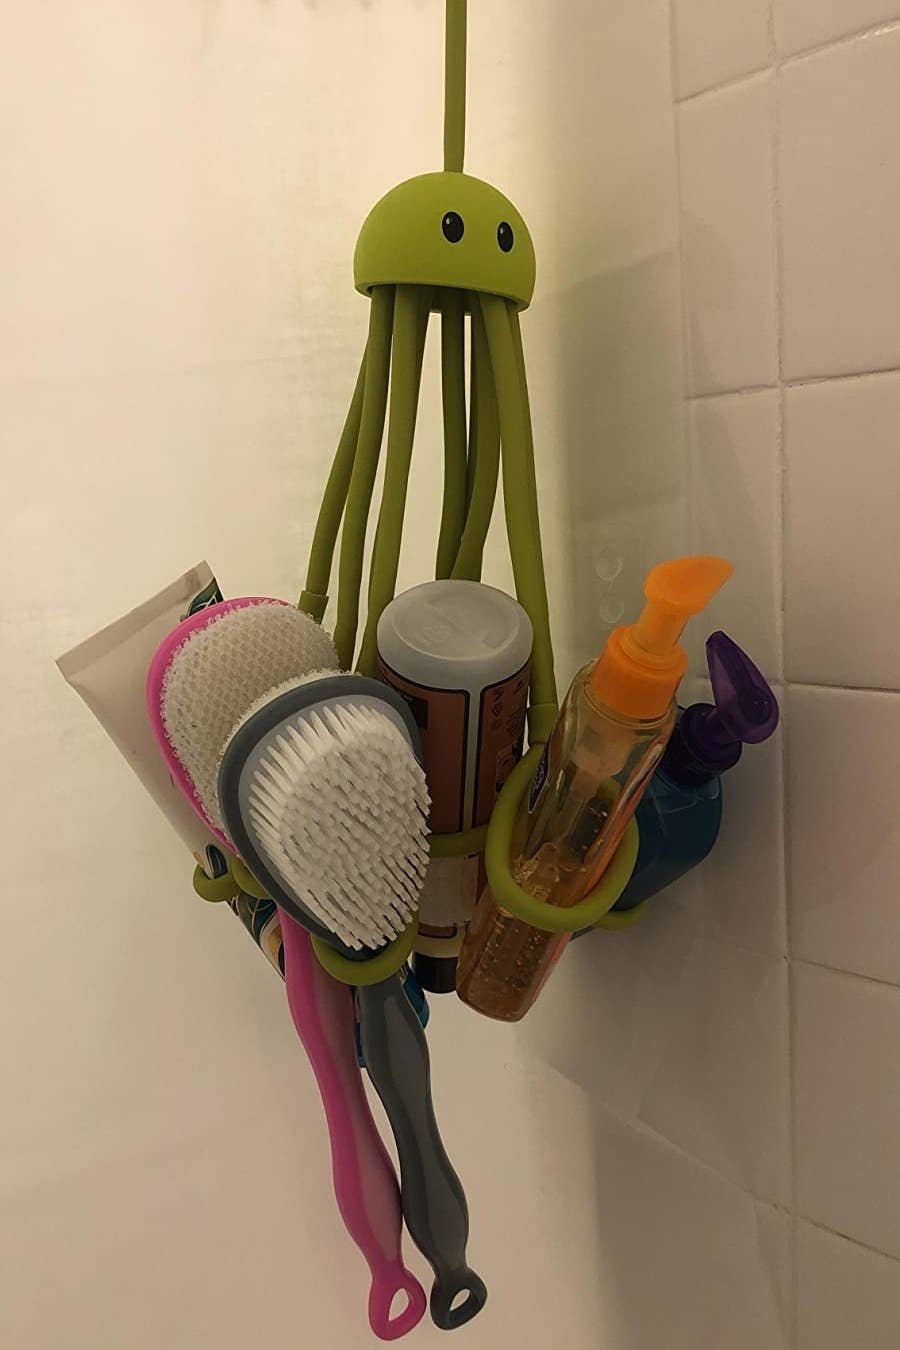 4 Fun Shower Essentials To Supercharge Your Bath time, Make the most of  your bath time with these 4 fun SHOWER ESSENTIALS!, By Glamrs